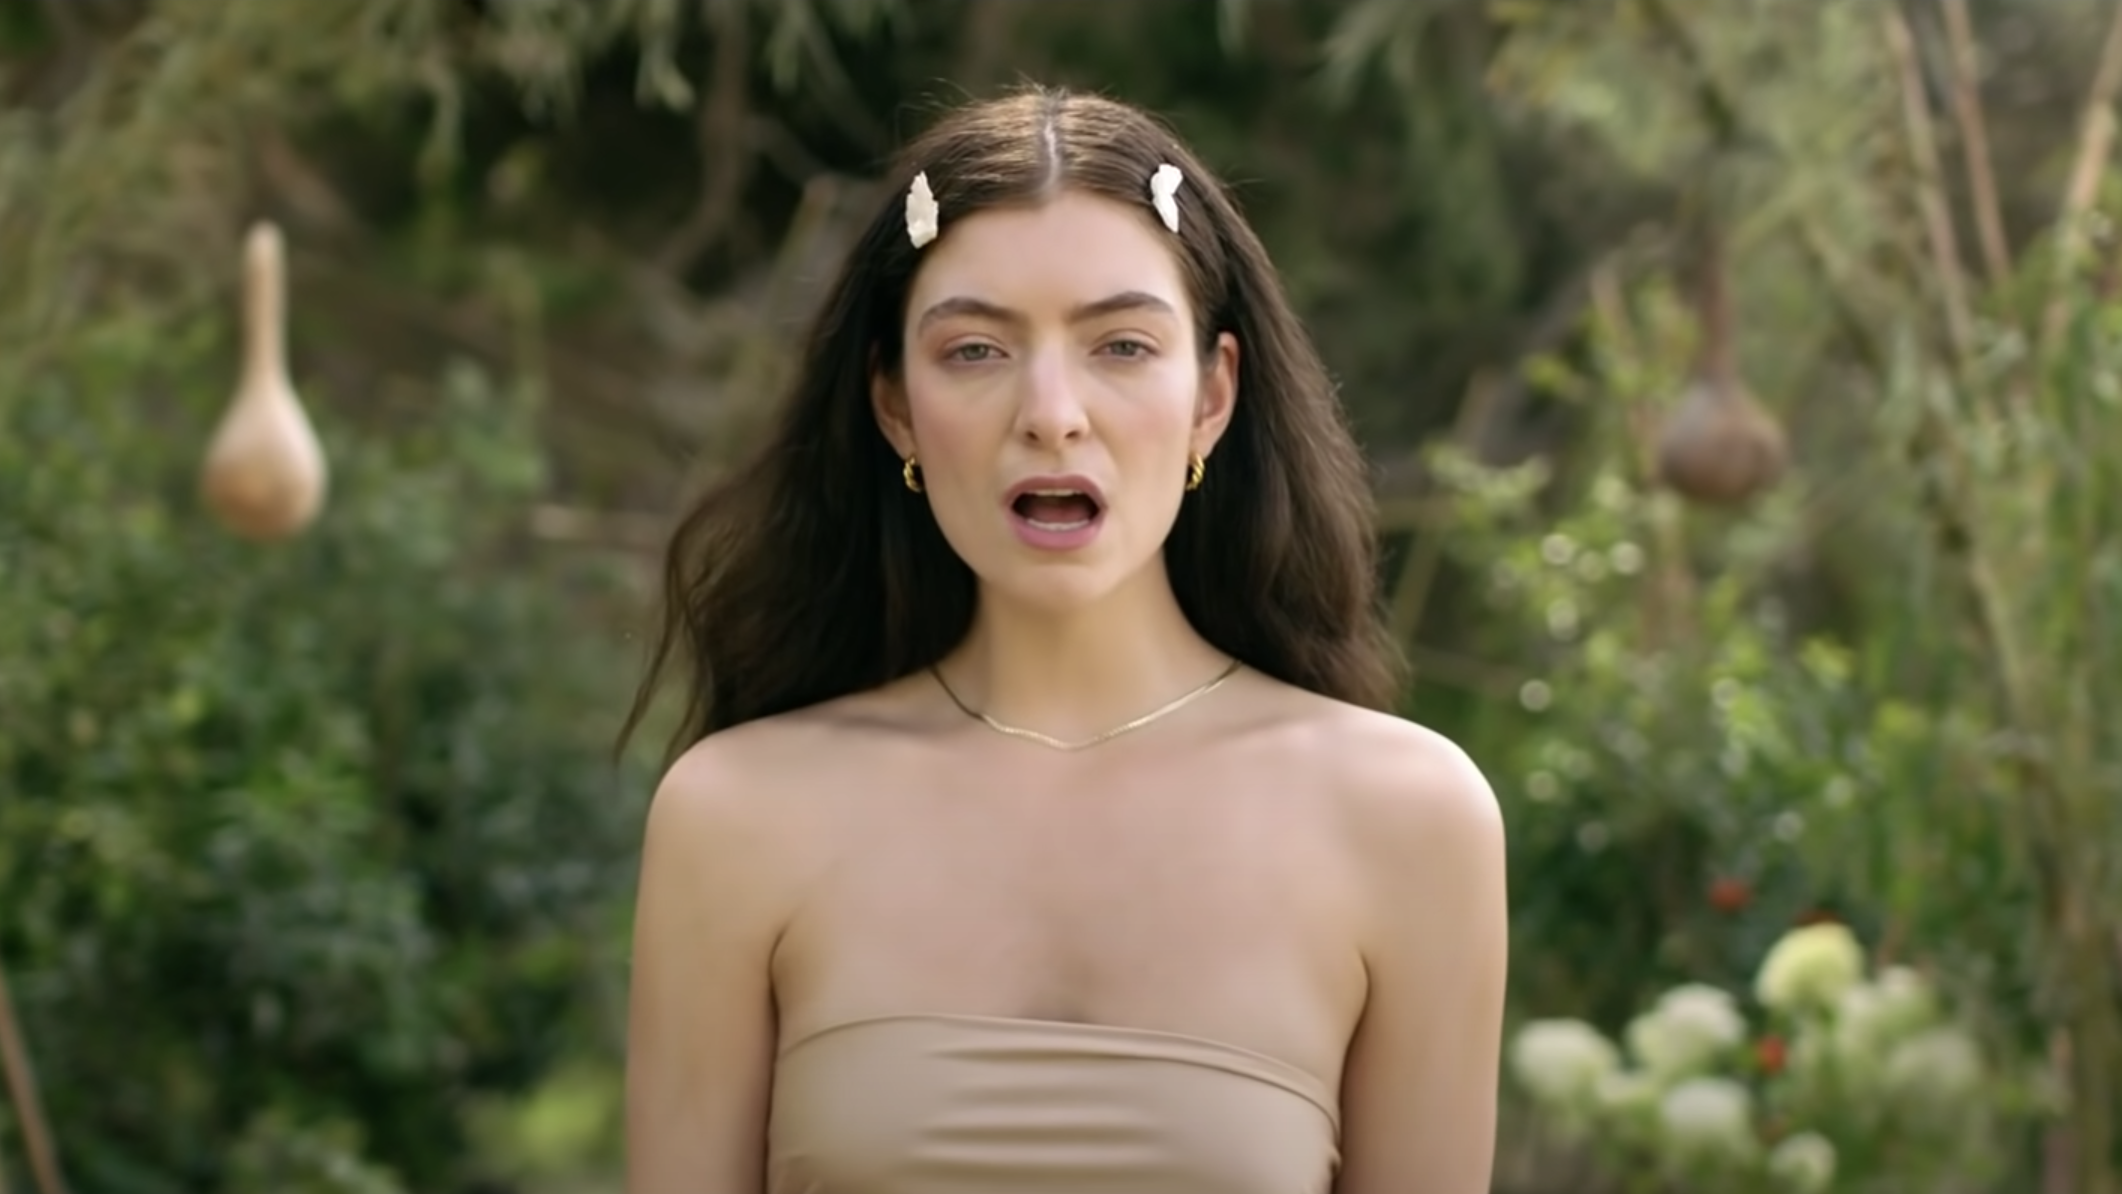 Lorde shares Solar Power bonus tracks “Helen Of Troy” and “Hold No Grudge”